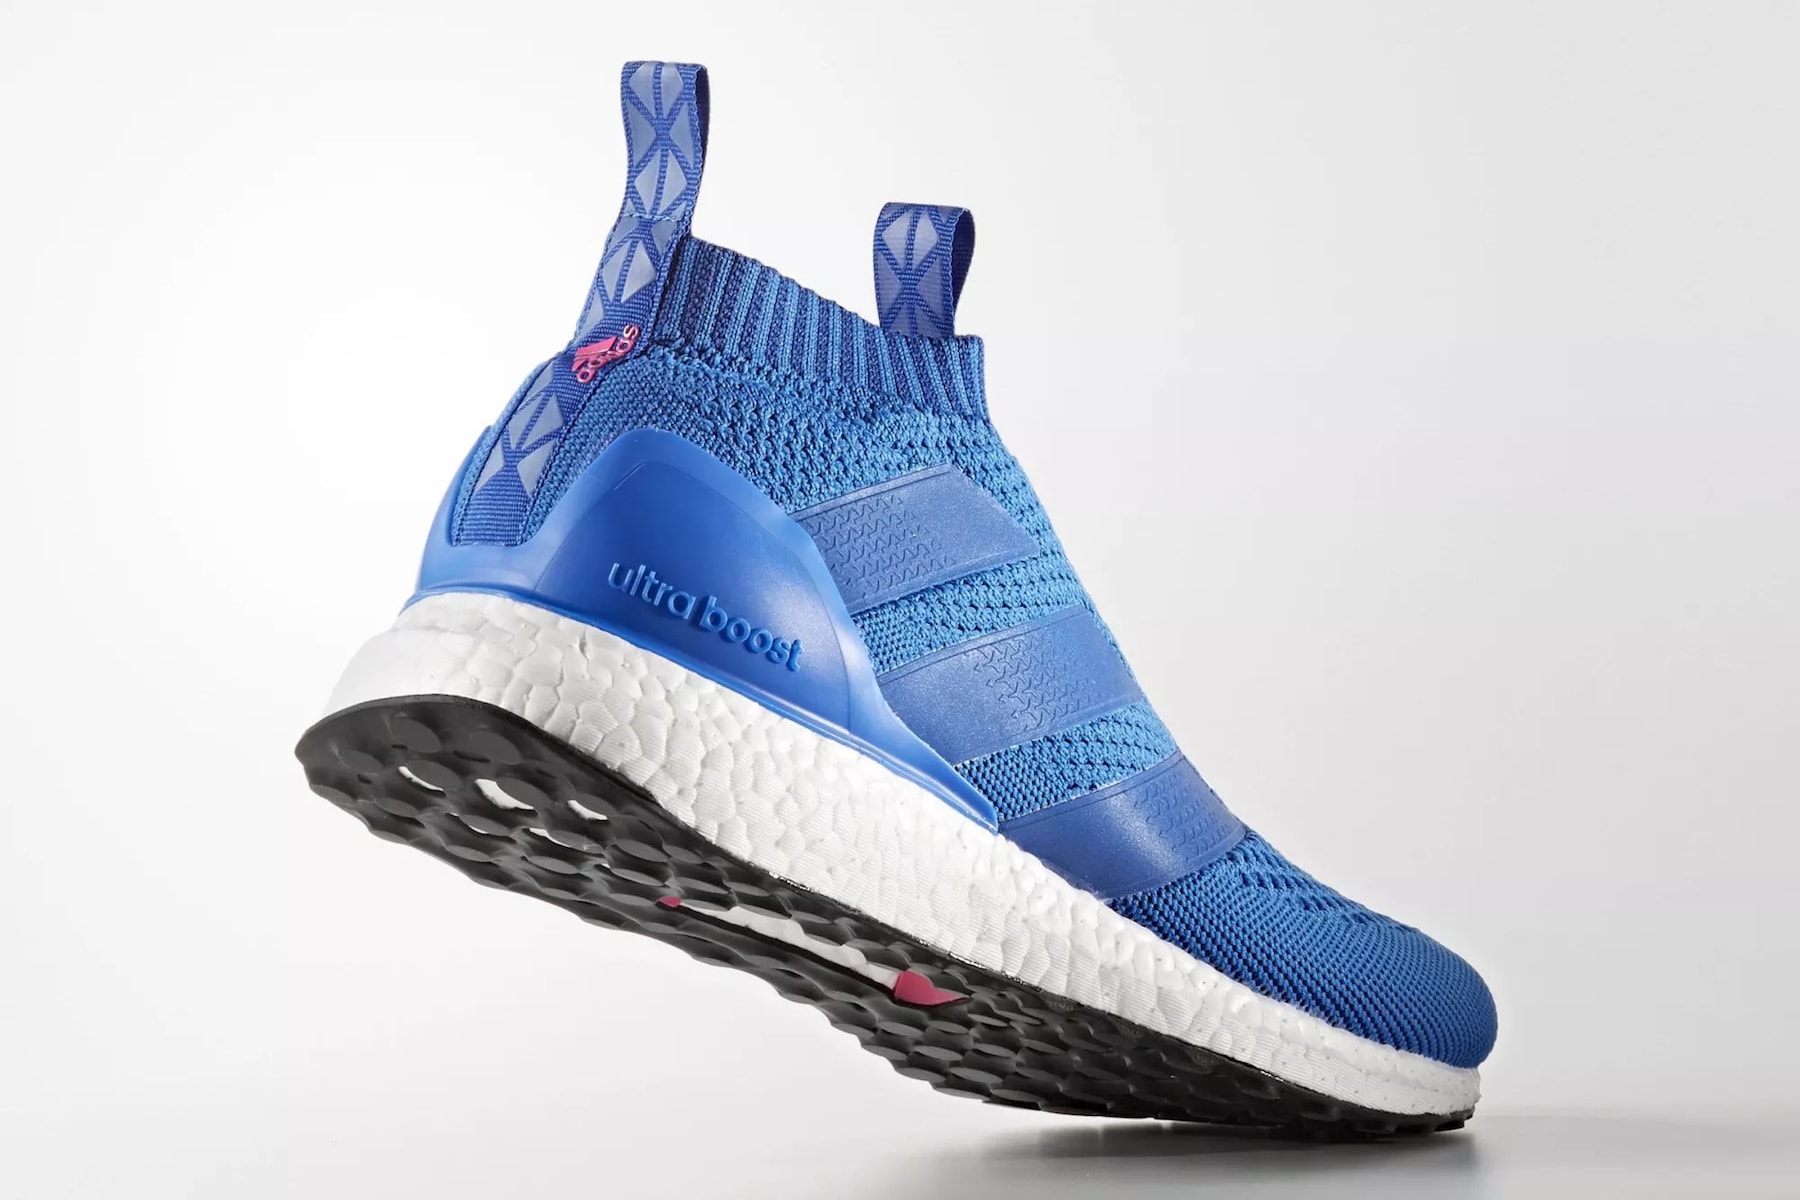 adidas ACE 16+ PureControl UltraBOOST “Blue Blast” Official Images